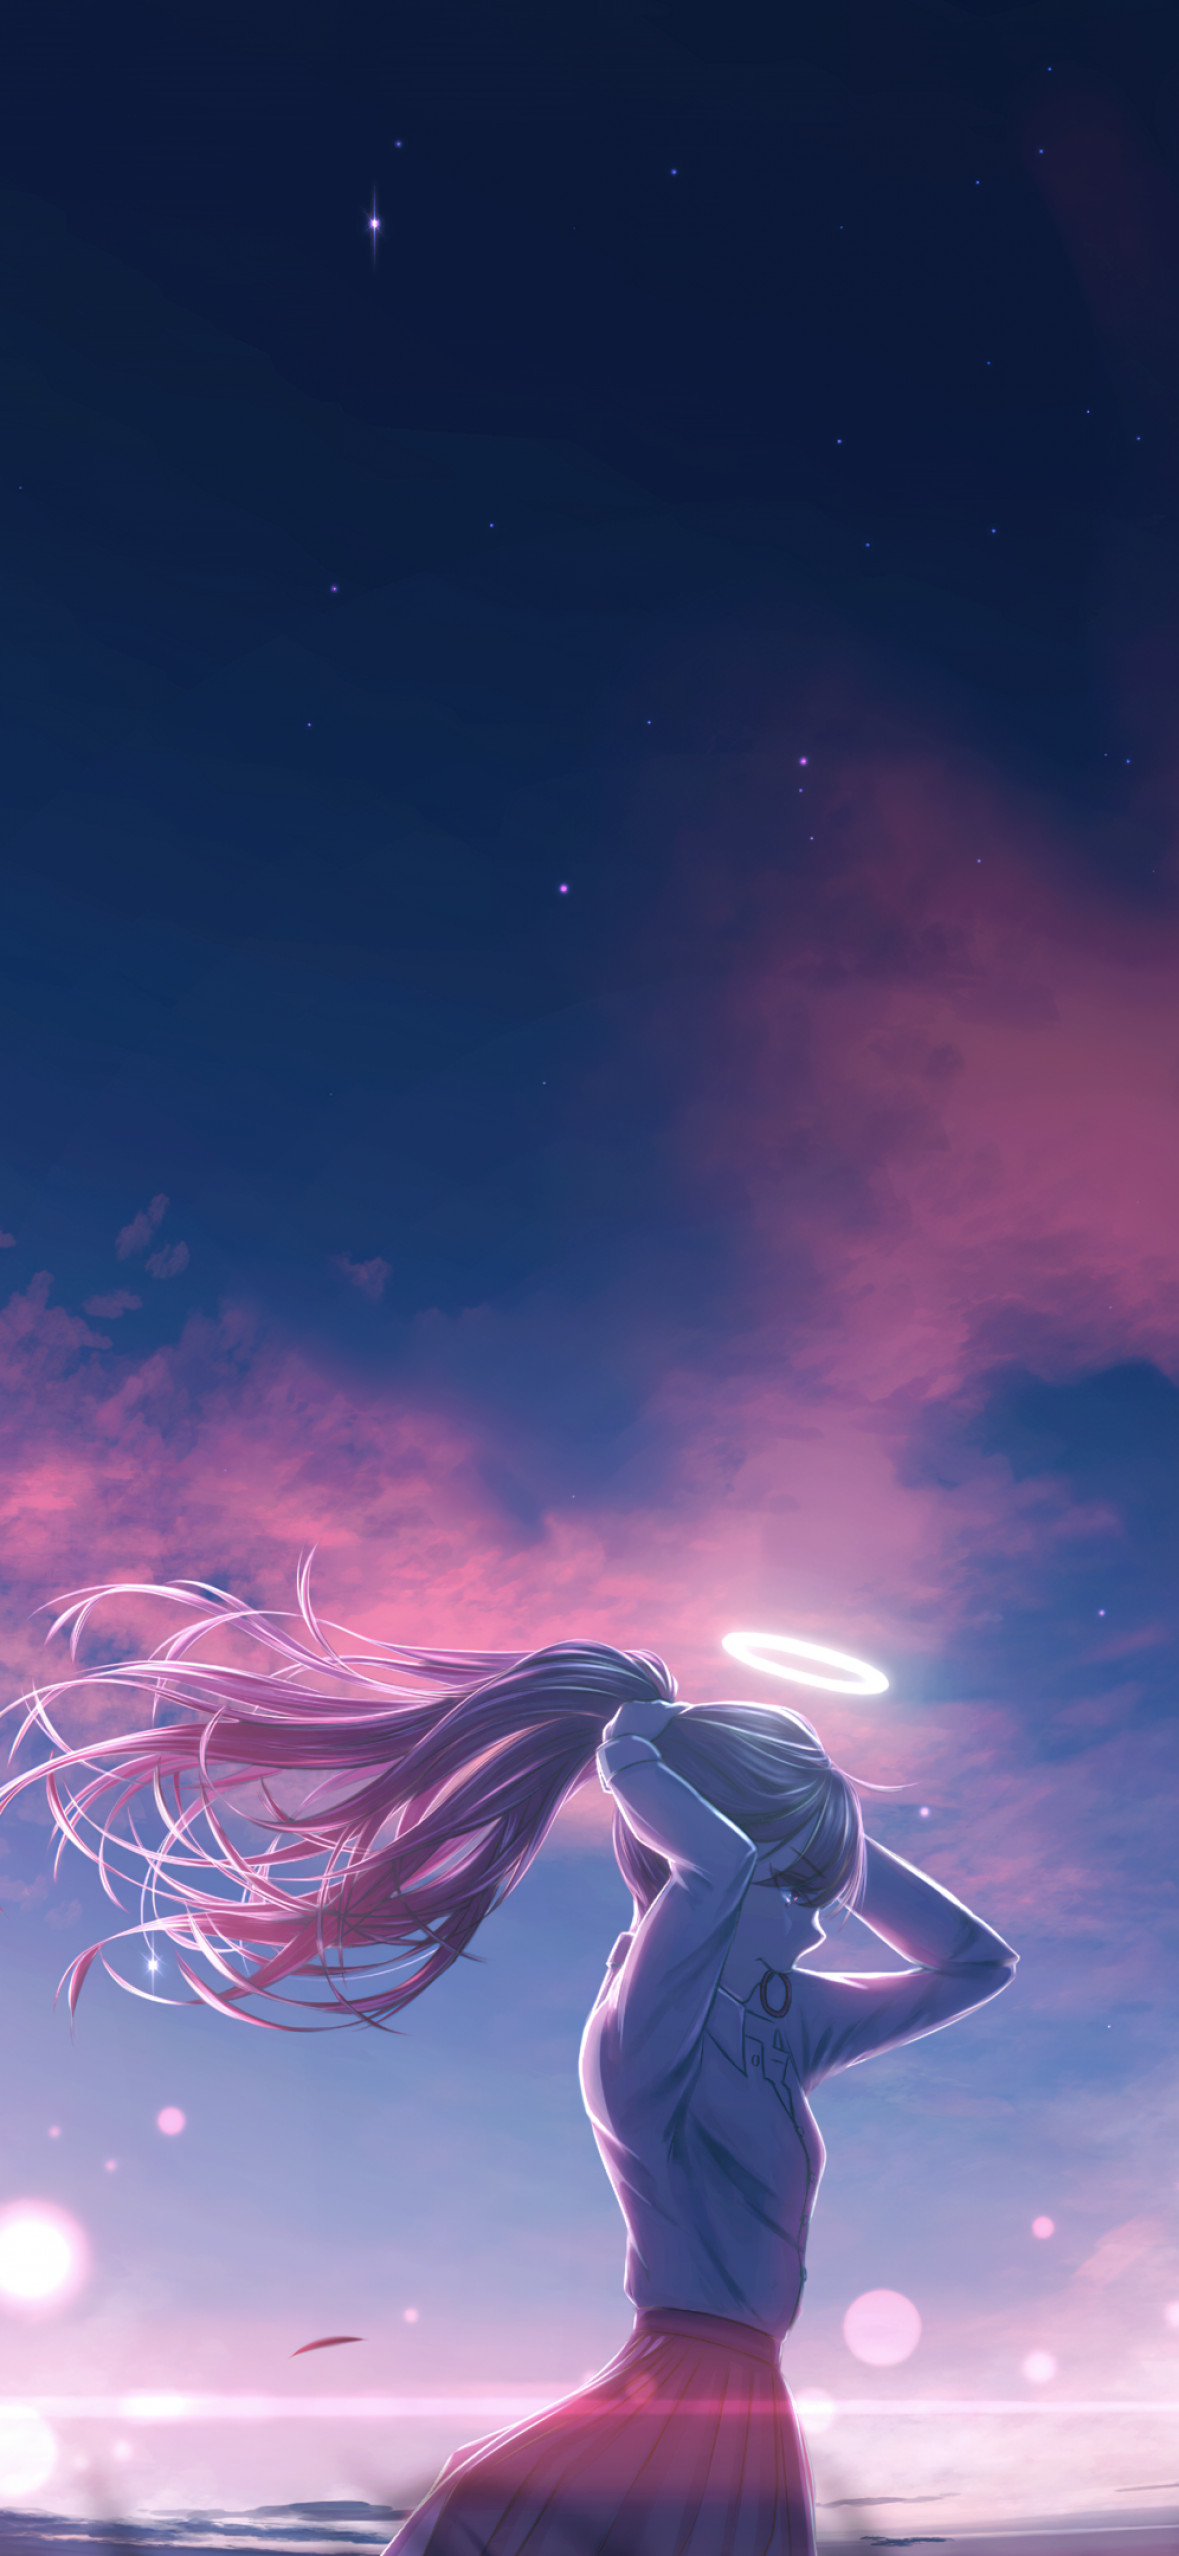 100+] Aesthetic Anime Iphone Wallpapers | Wallpapers.com